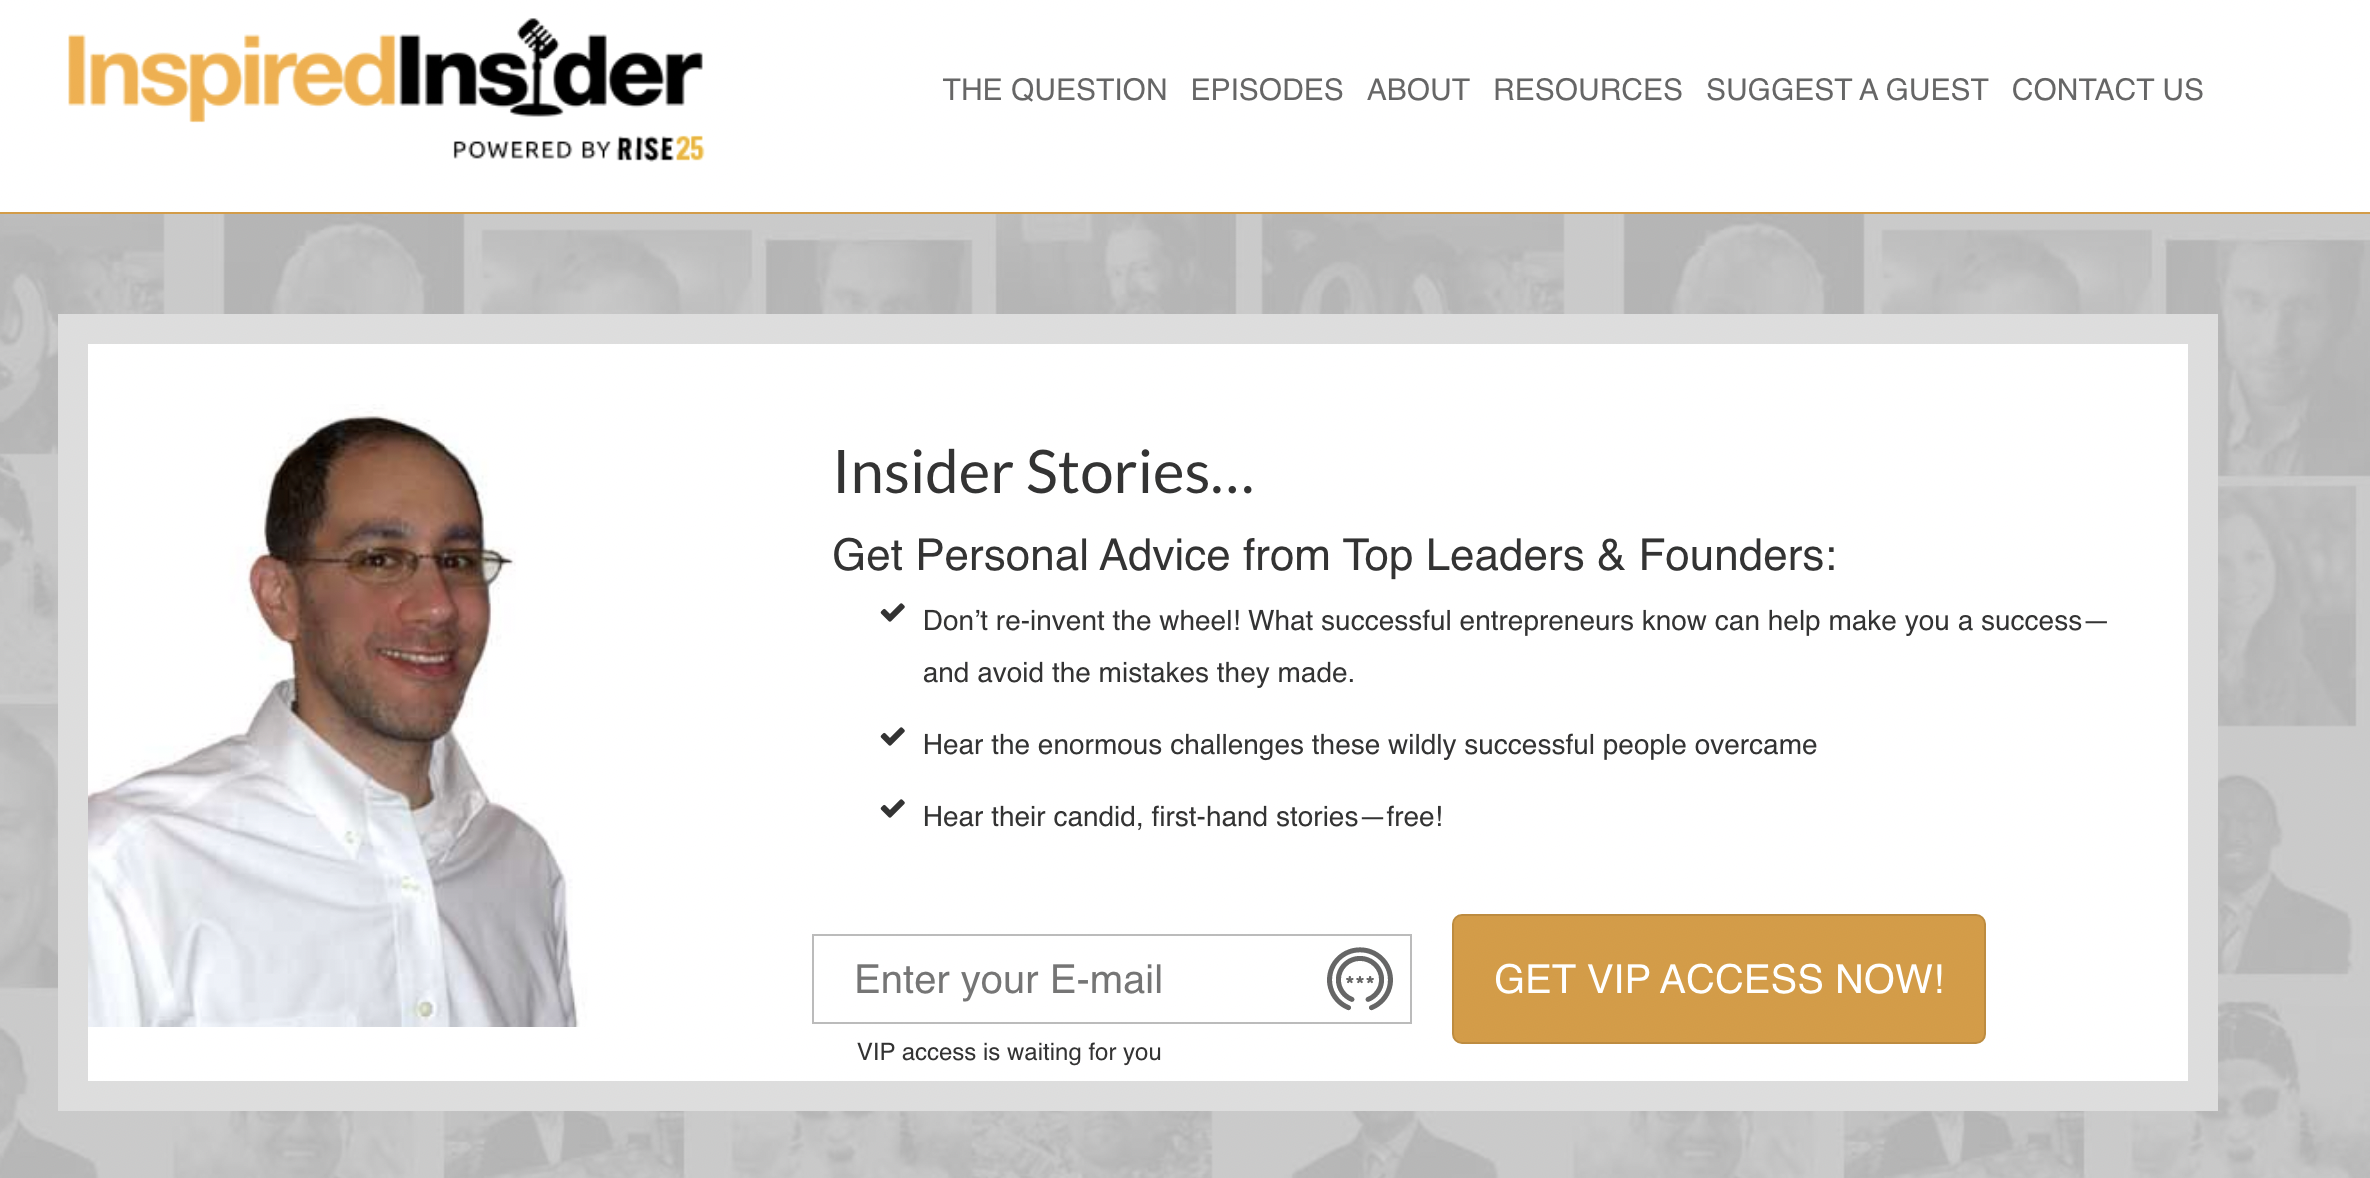 Image of INspired INsider homepage